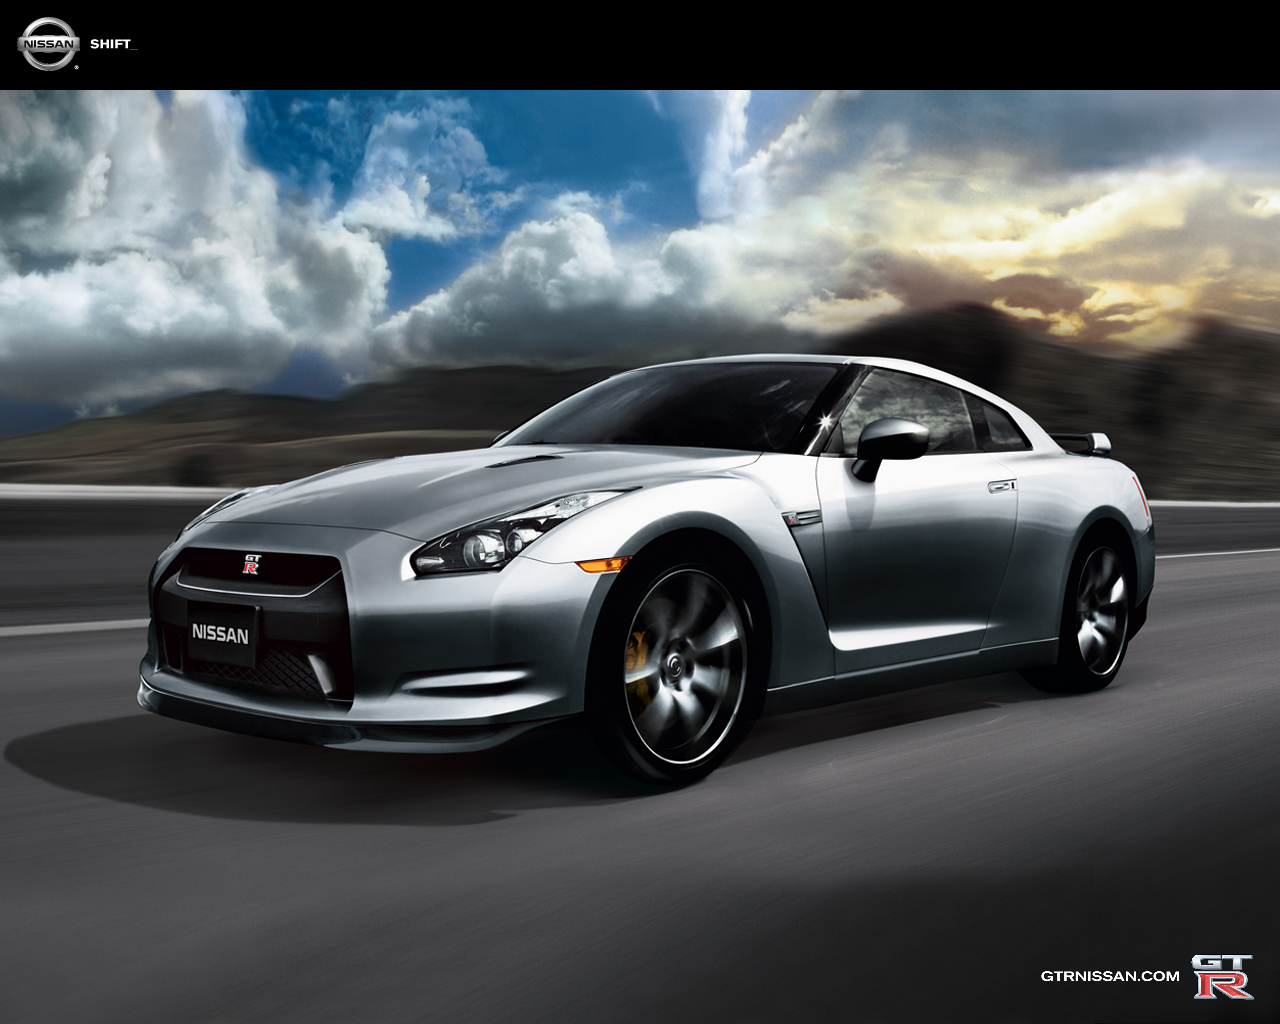 Gtr Image Gallery Exterior Wallpaper X Cars Background HD